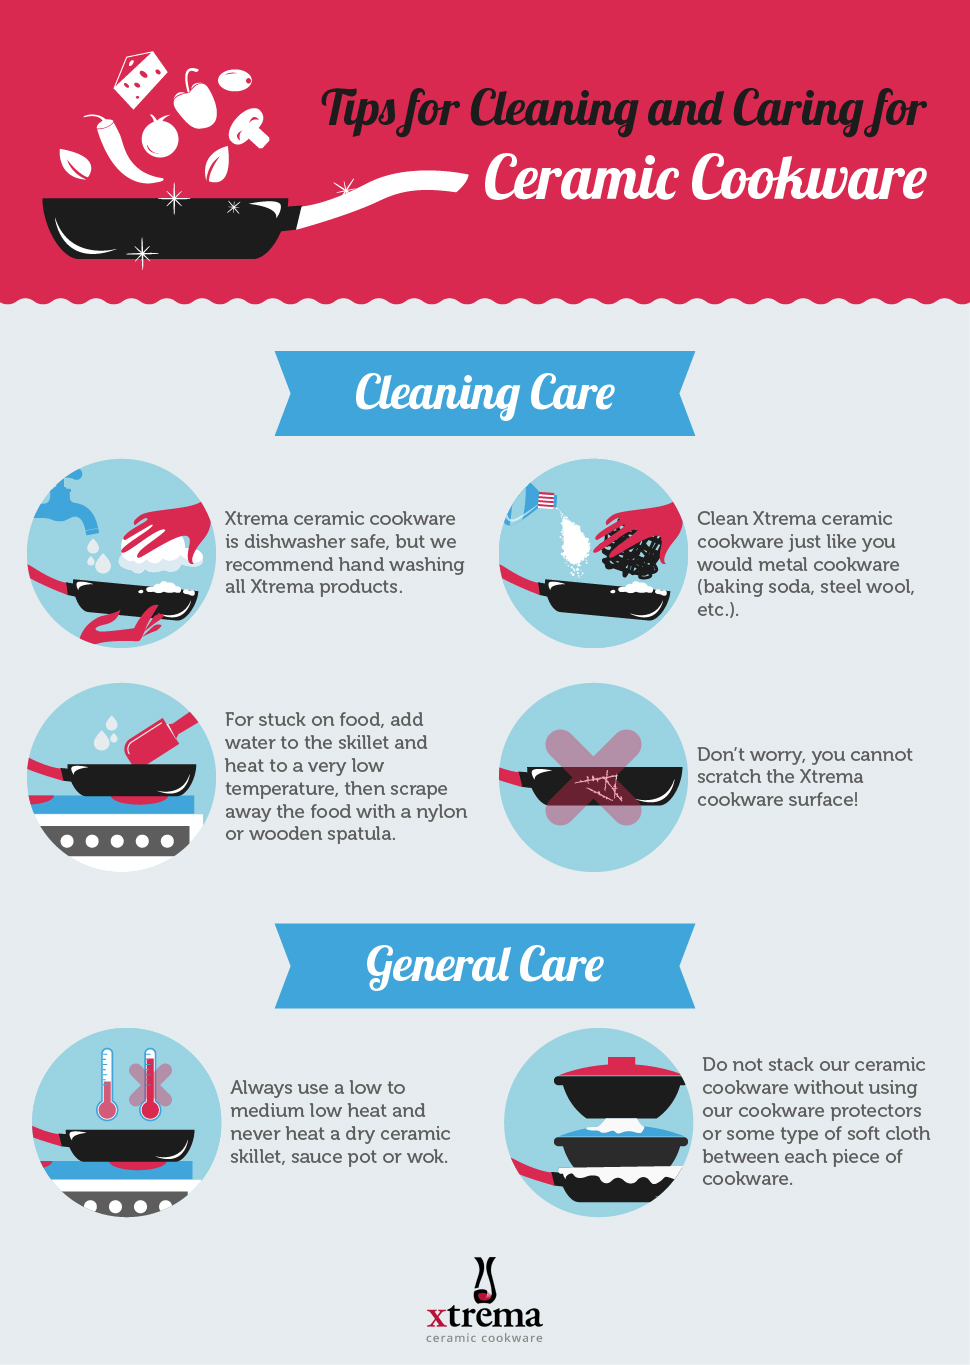 Tips For Cleaning And Caring For Ceramic Cookware, Xtrema